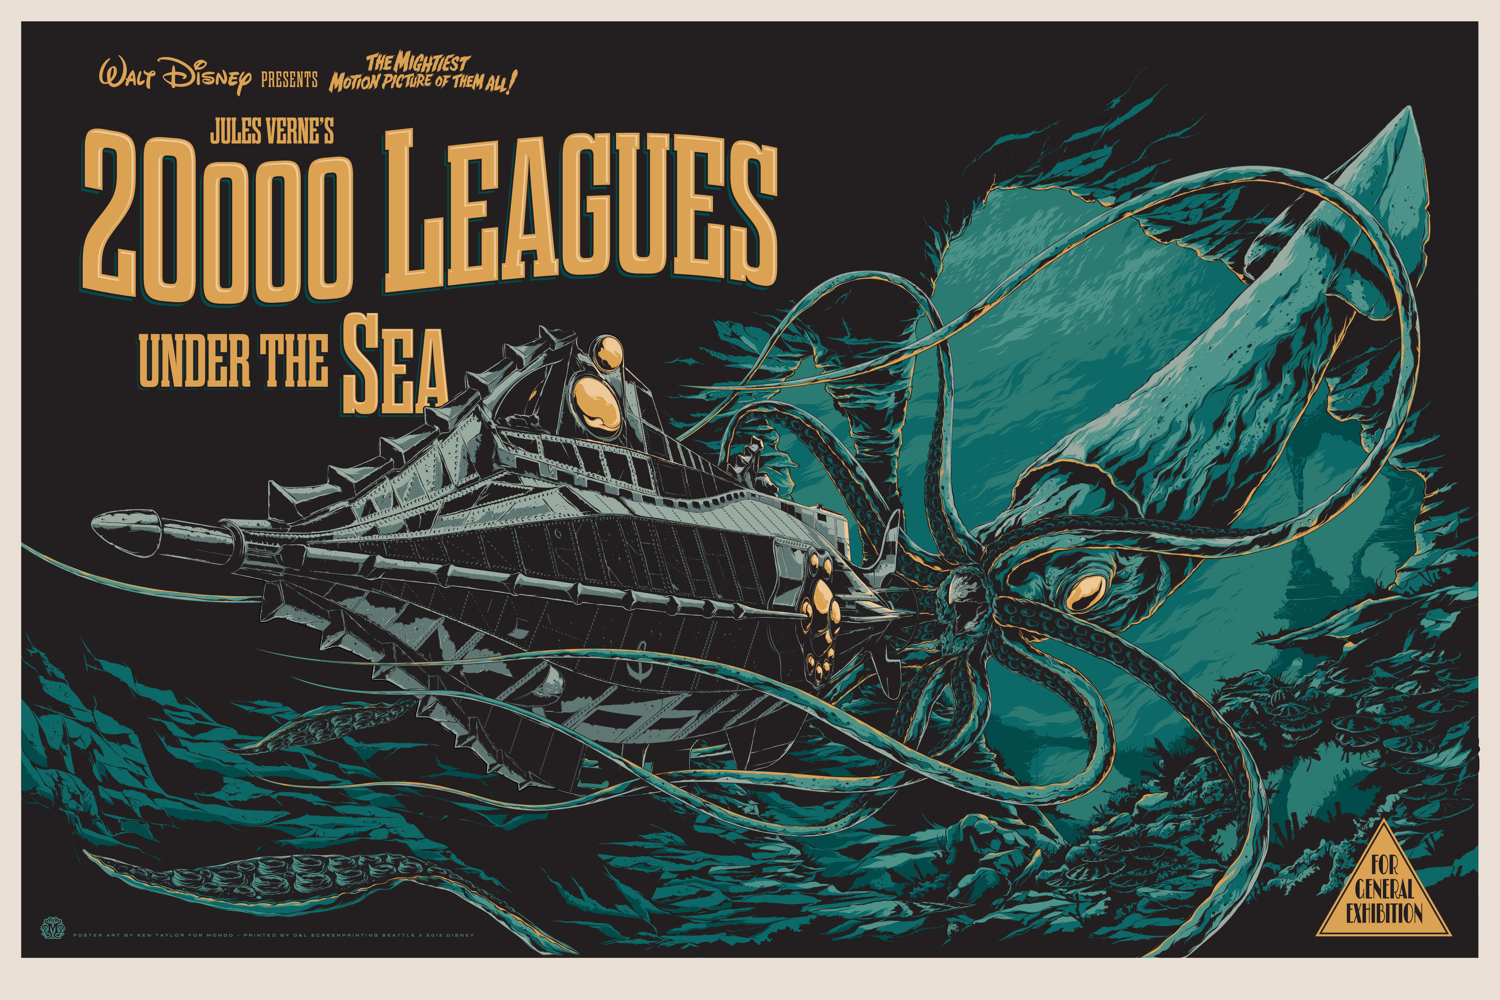 20000 leagues under the sea story book review